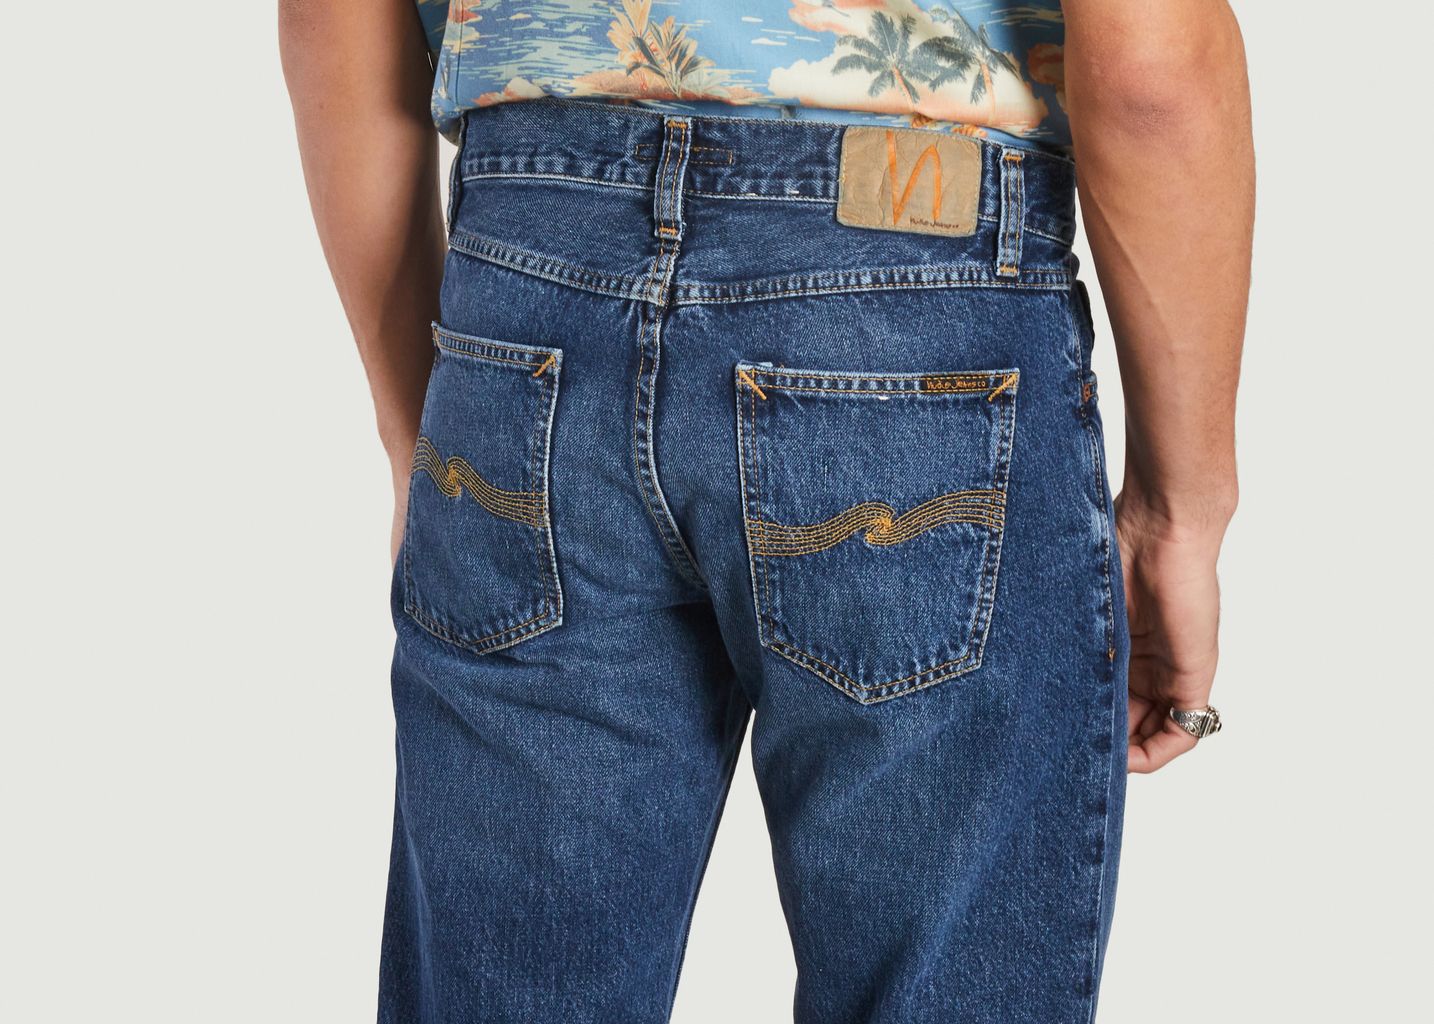 Gritty Jackson Reguläre Jeans - Nudie Jeans